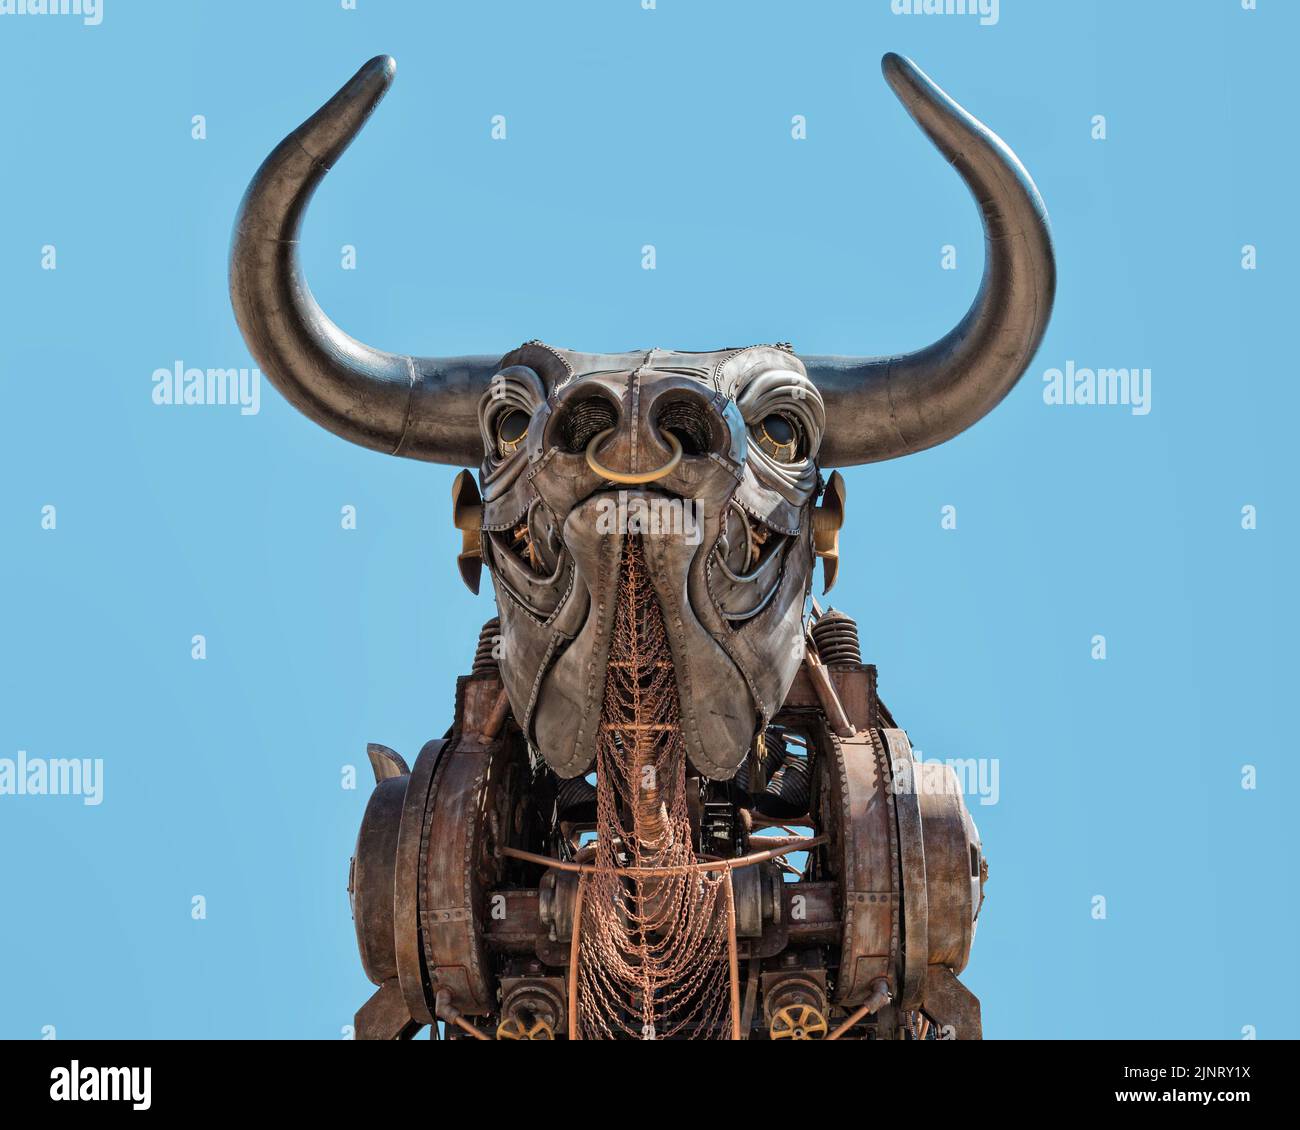 Detail of the 10 metre high raging bull from the 2022 Commonwealth Games opening ceremony, now a tourist attraction. Isolated against a blue sky. Stock Photo